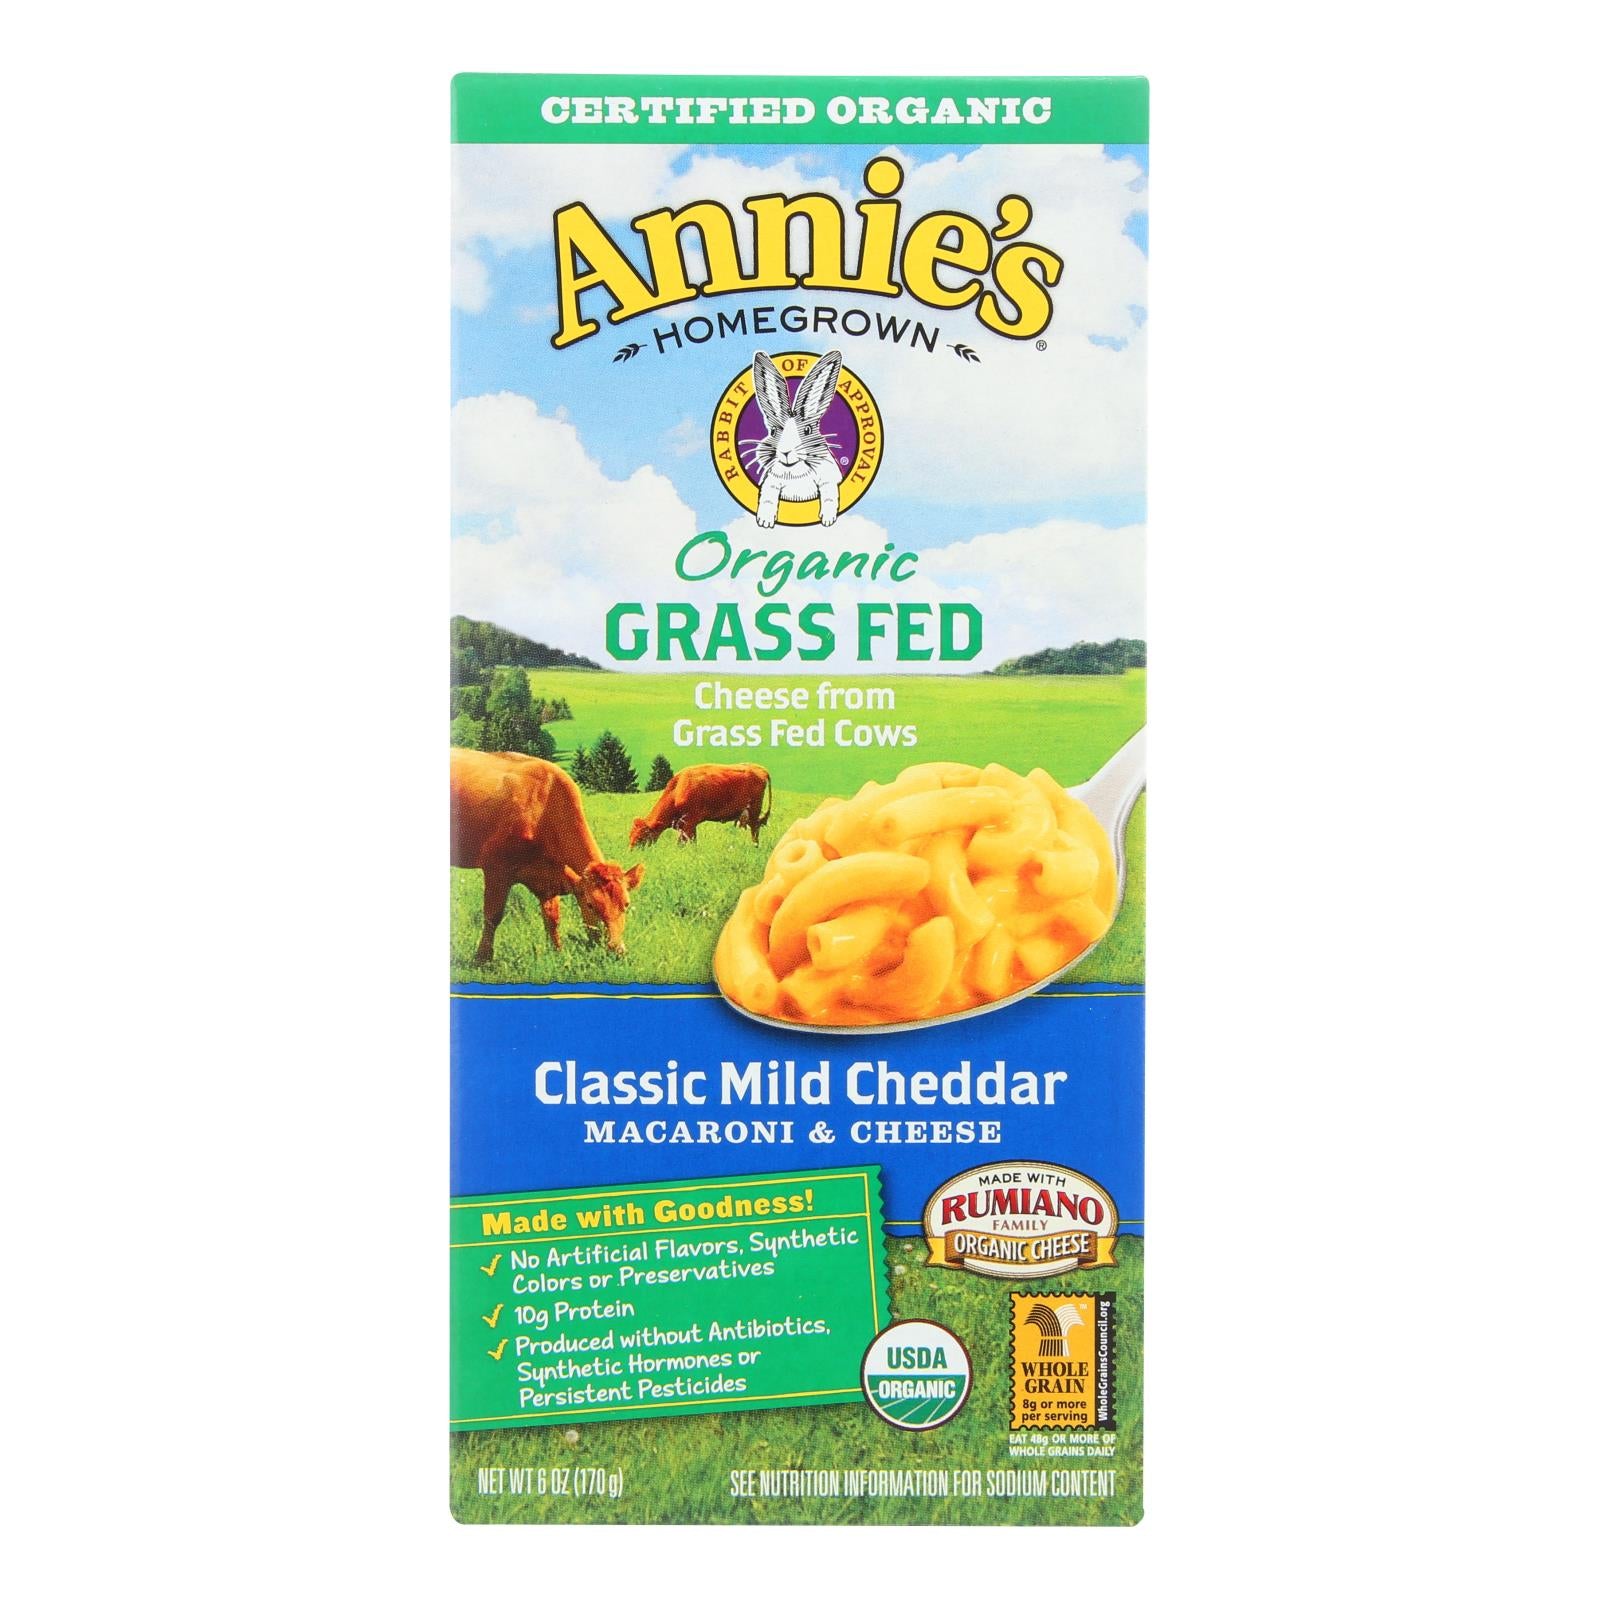 Annie'S Homegrown, Annies Homegrown Macaroni and Cheese - Organic - Grass Fed - Classic Mild Cheddar - 6 oz - case of 12 (Pack of 12)